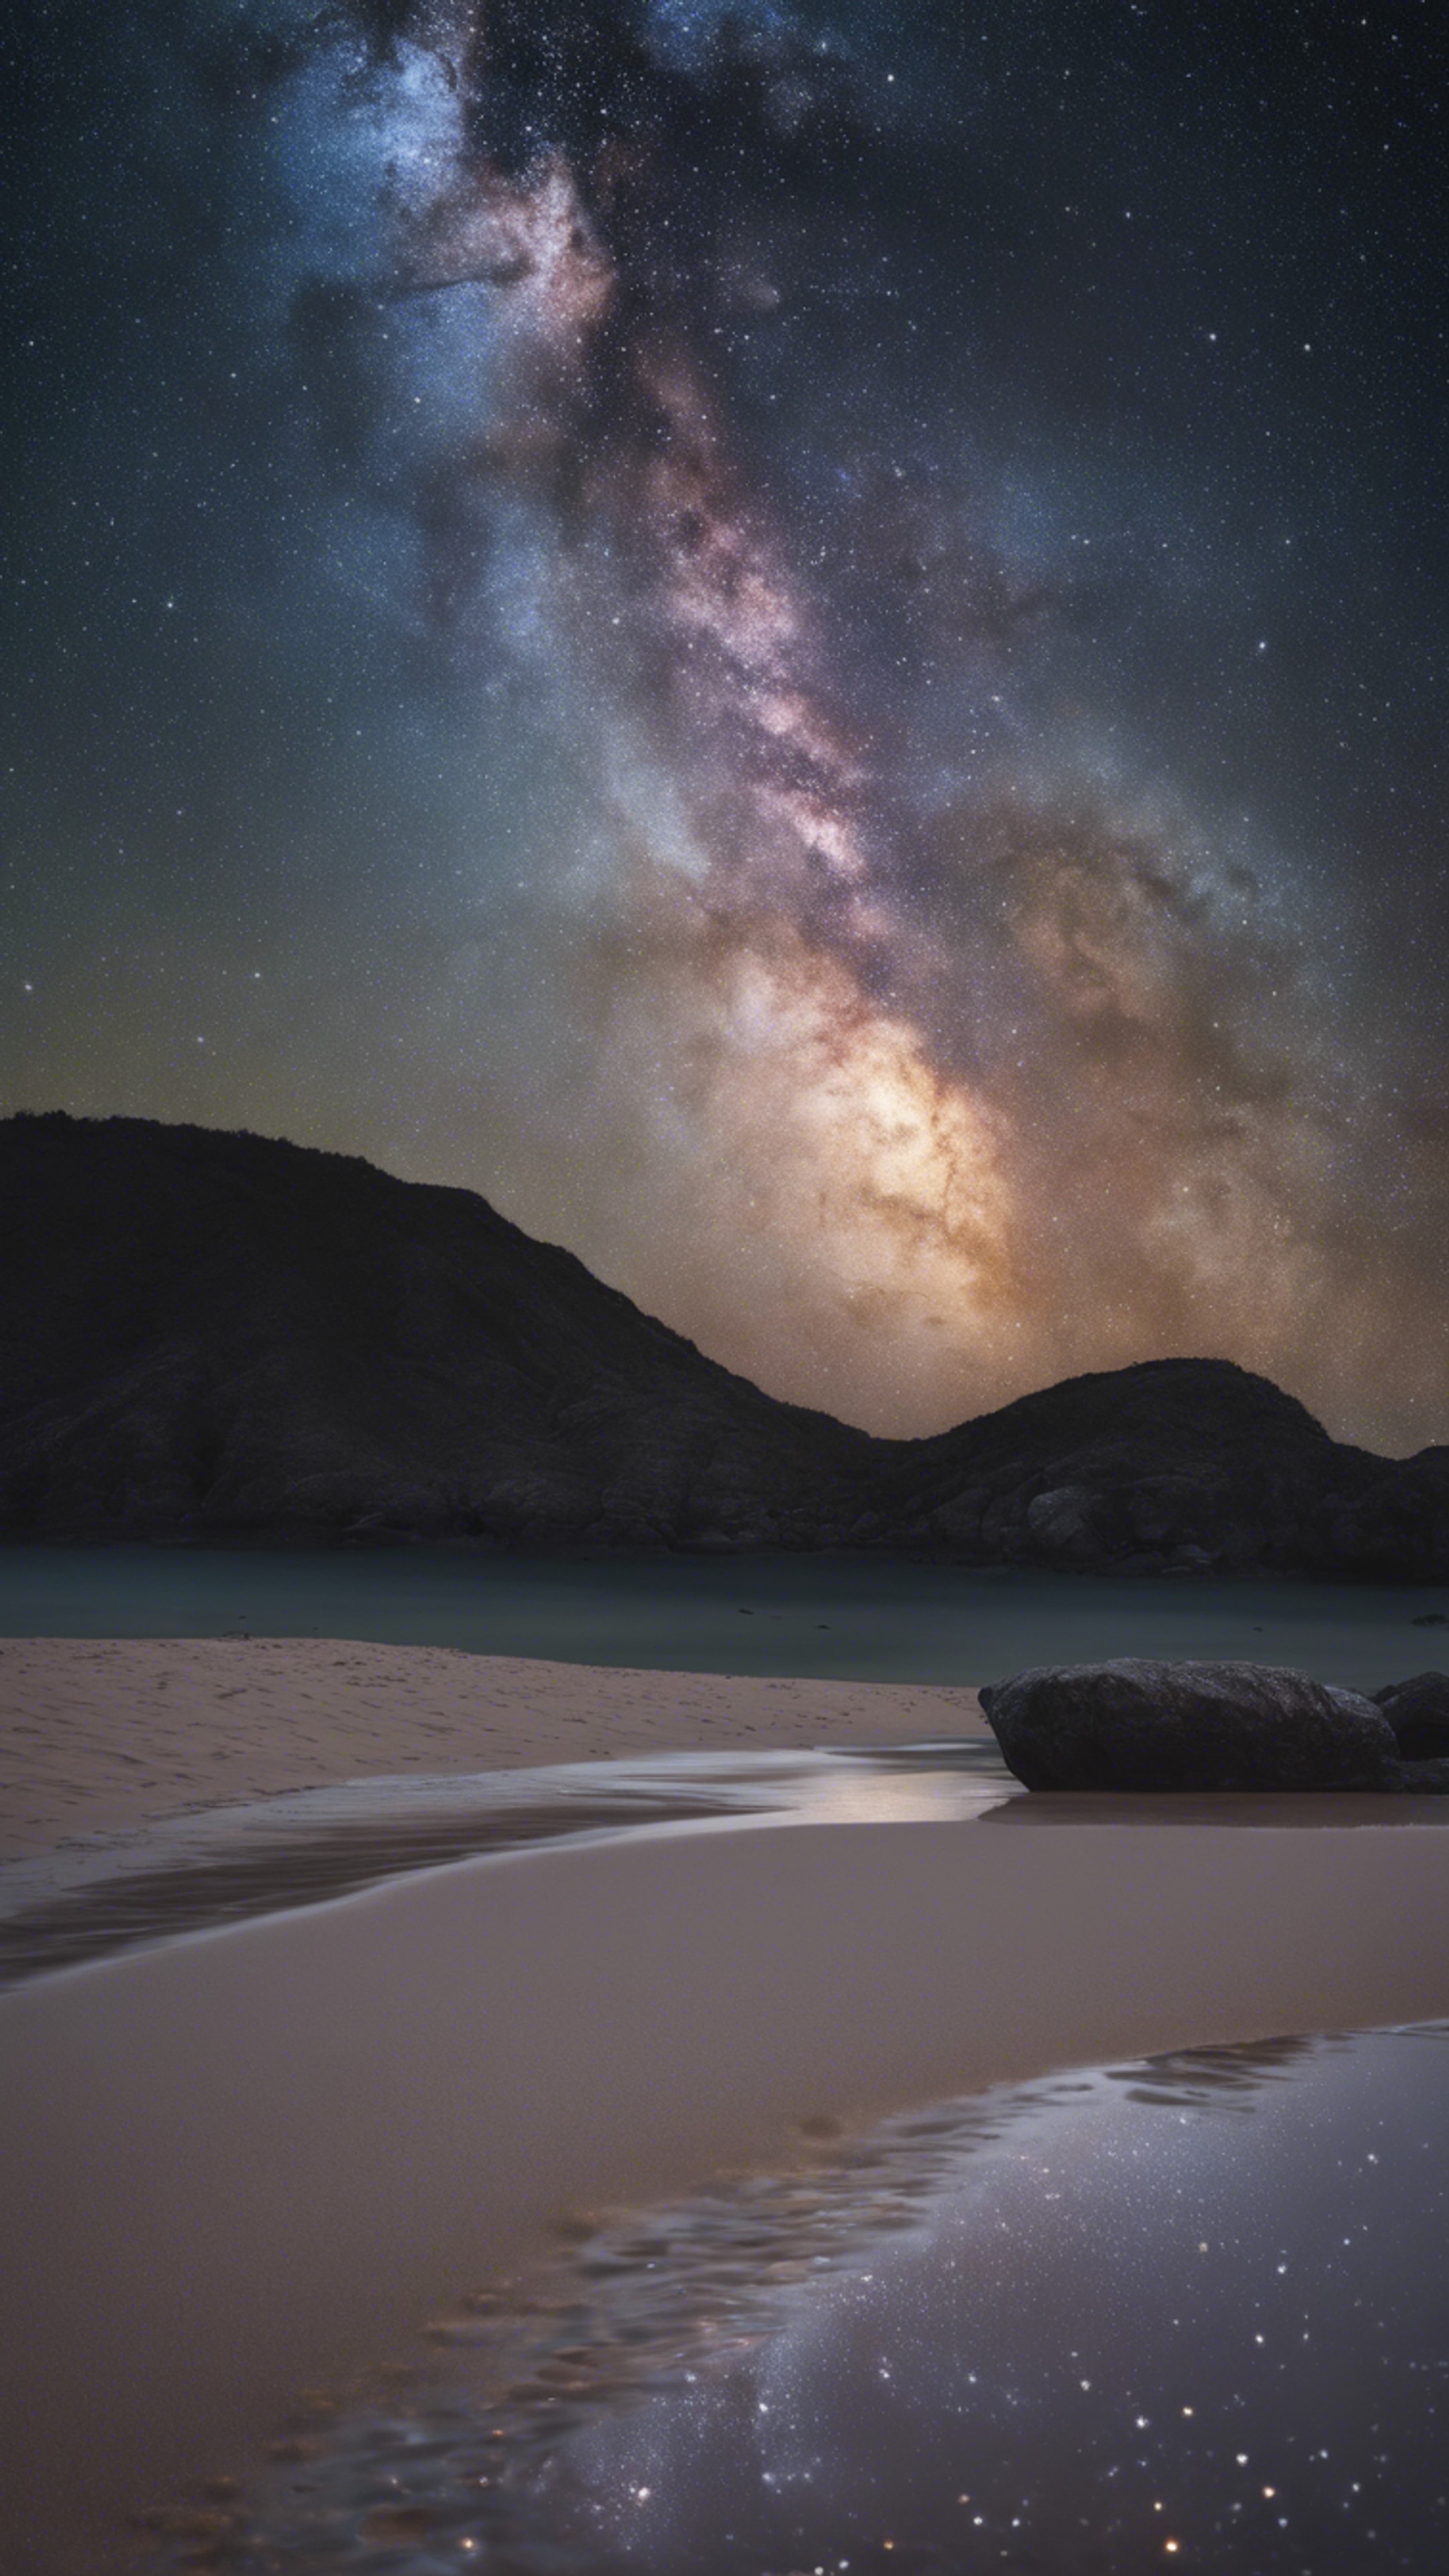 View of the Milky Way Galaxy across a dark starry night sky as seen from a deserted beach. Wallpaper[ccd5588141b94e439f84]